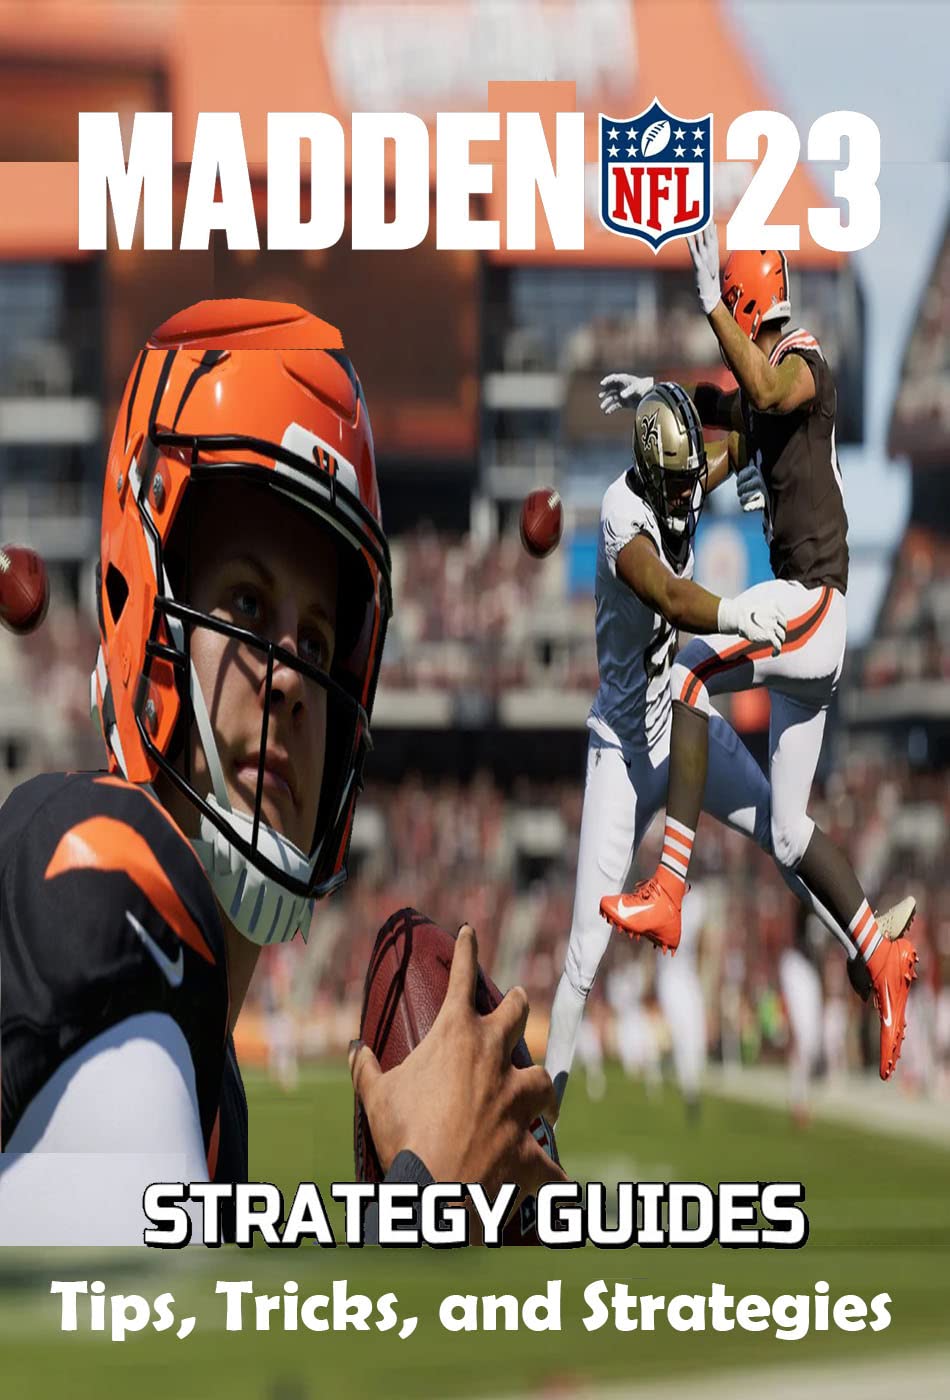 MADDEN NFL 23 The Complete guide and walkthrough: Tips, Tricks, and Strategies